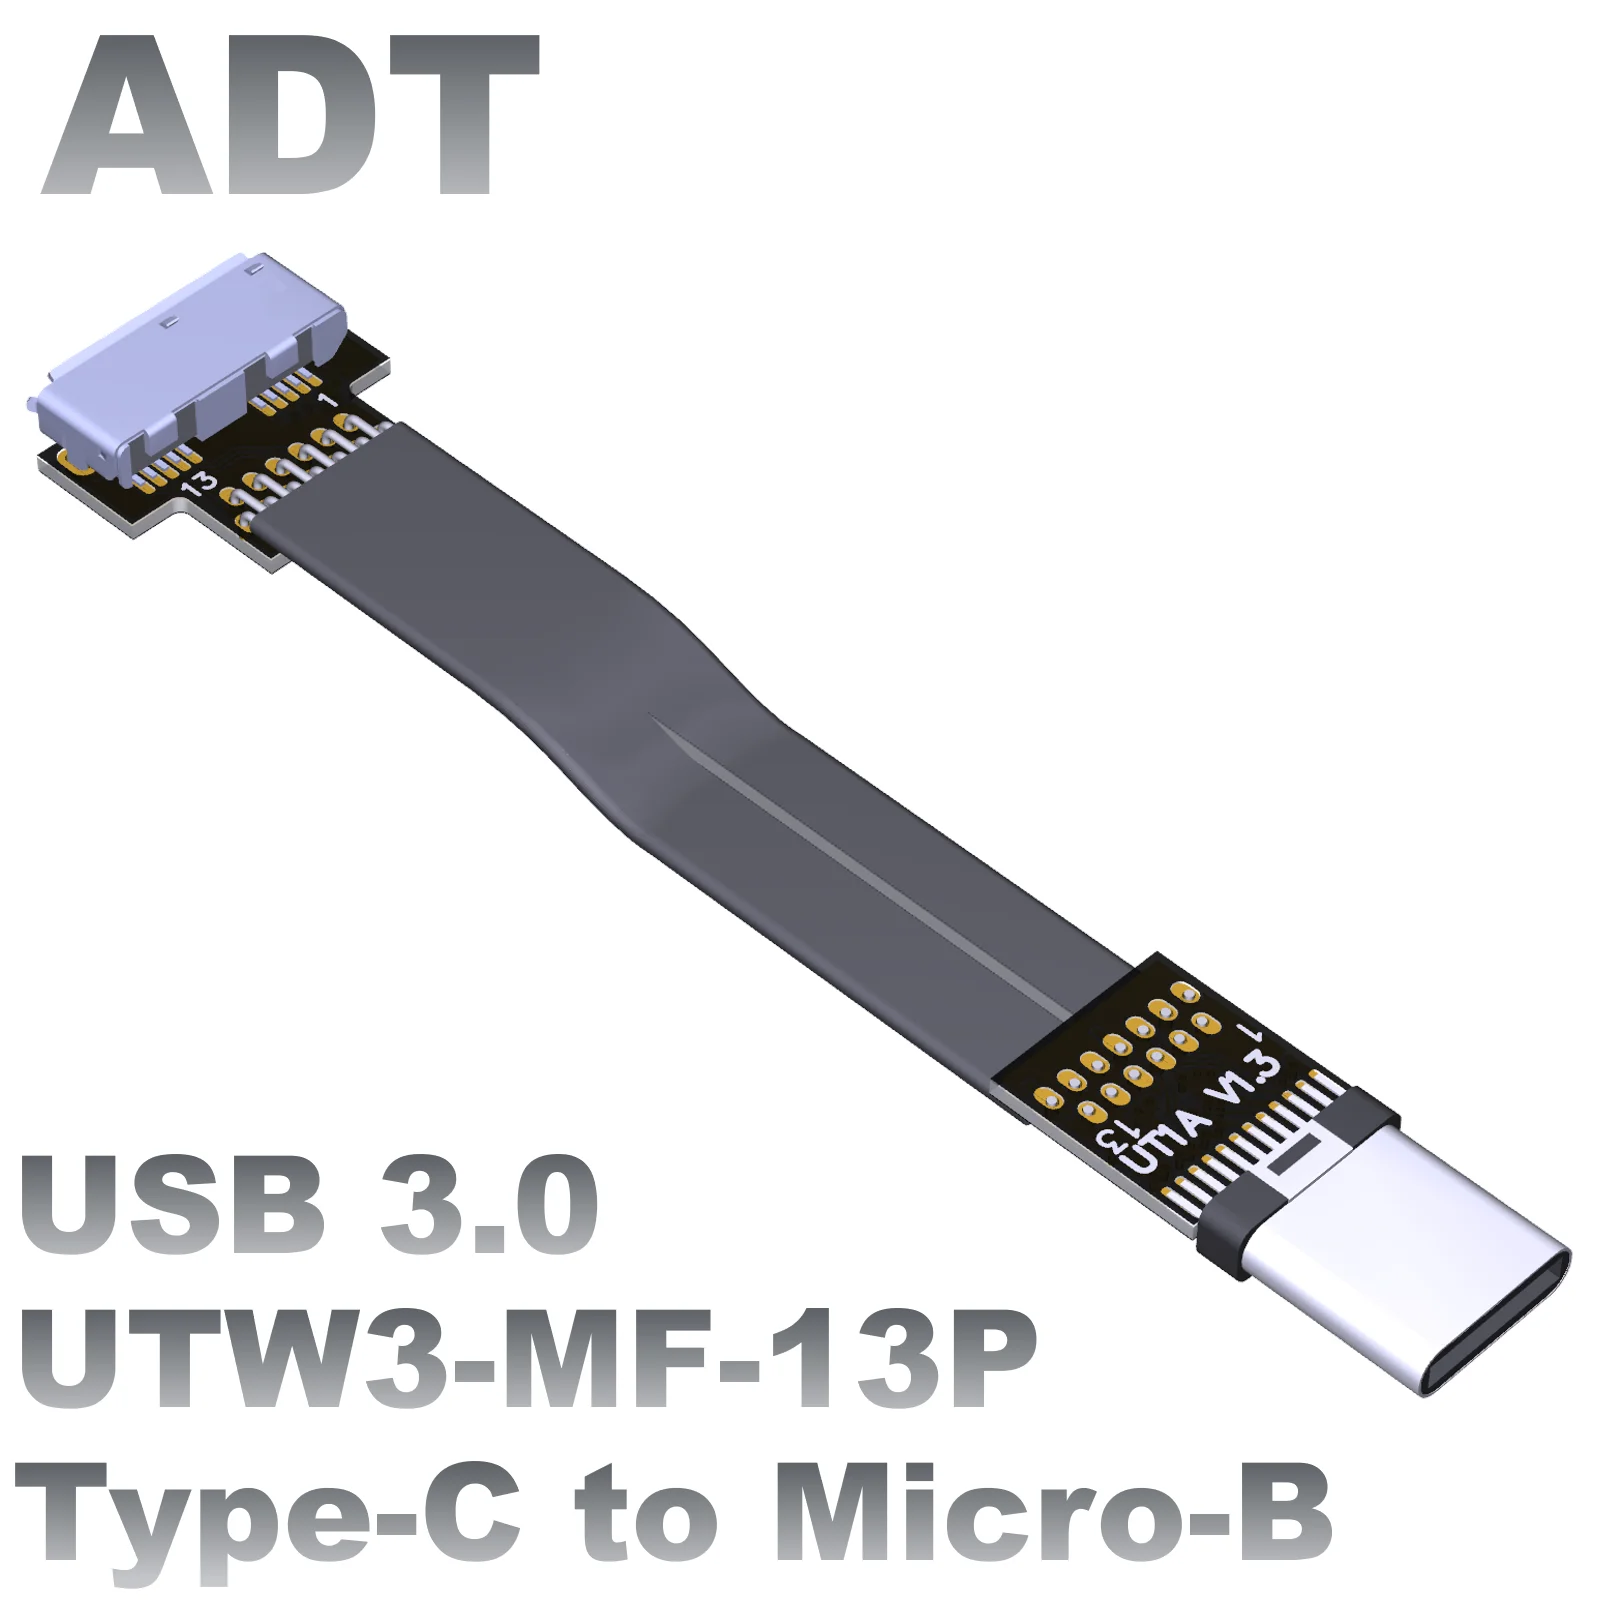 

USB3.0 male to female flat, thin, and long extension cable Type-C to micro-B corner